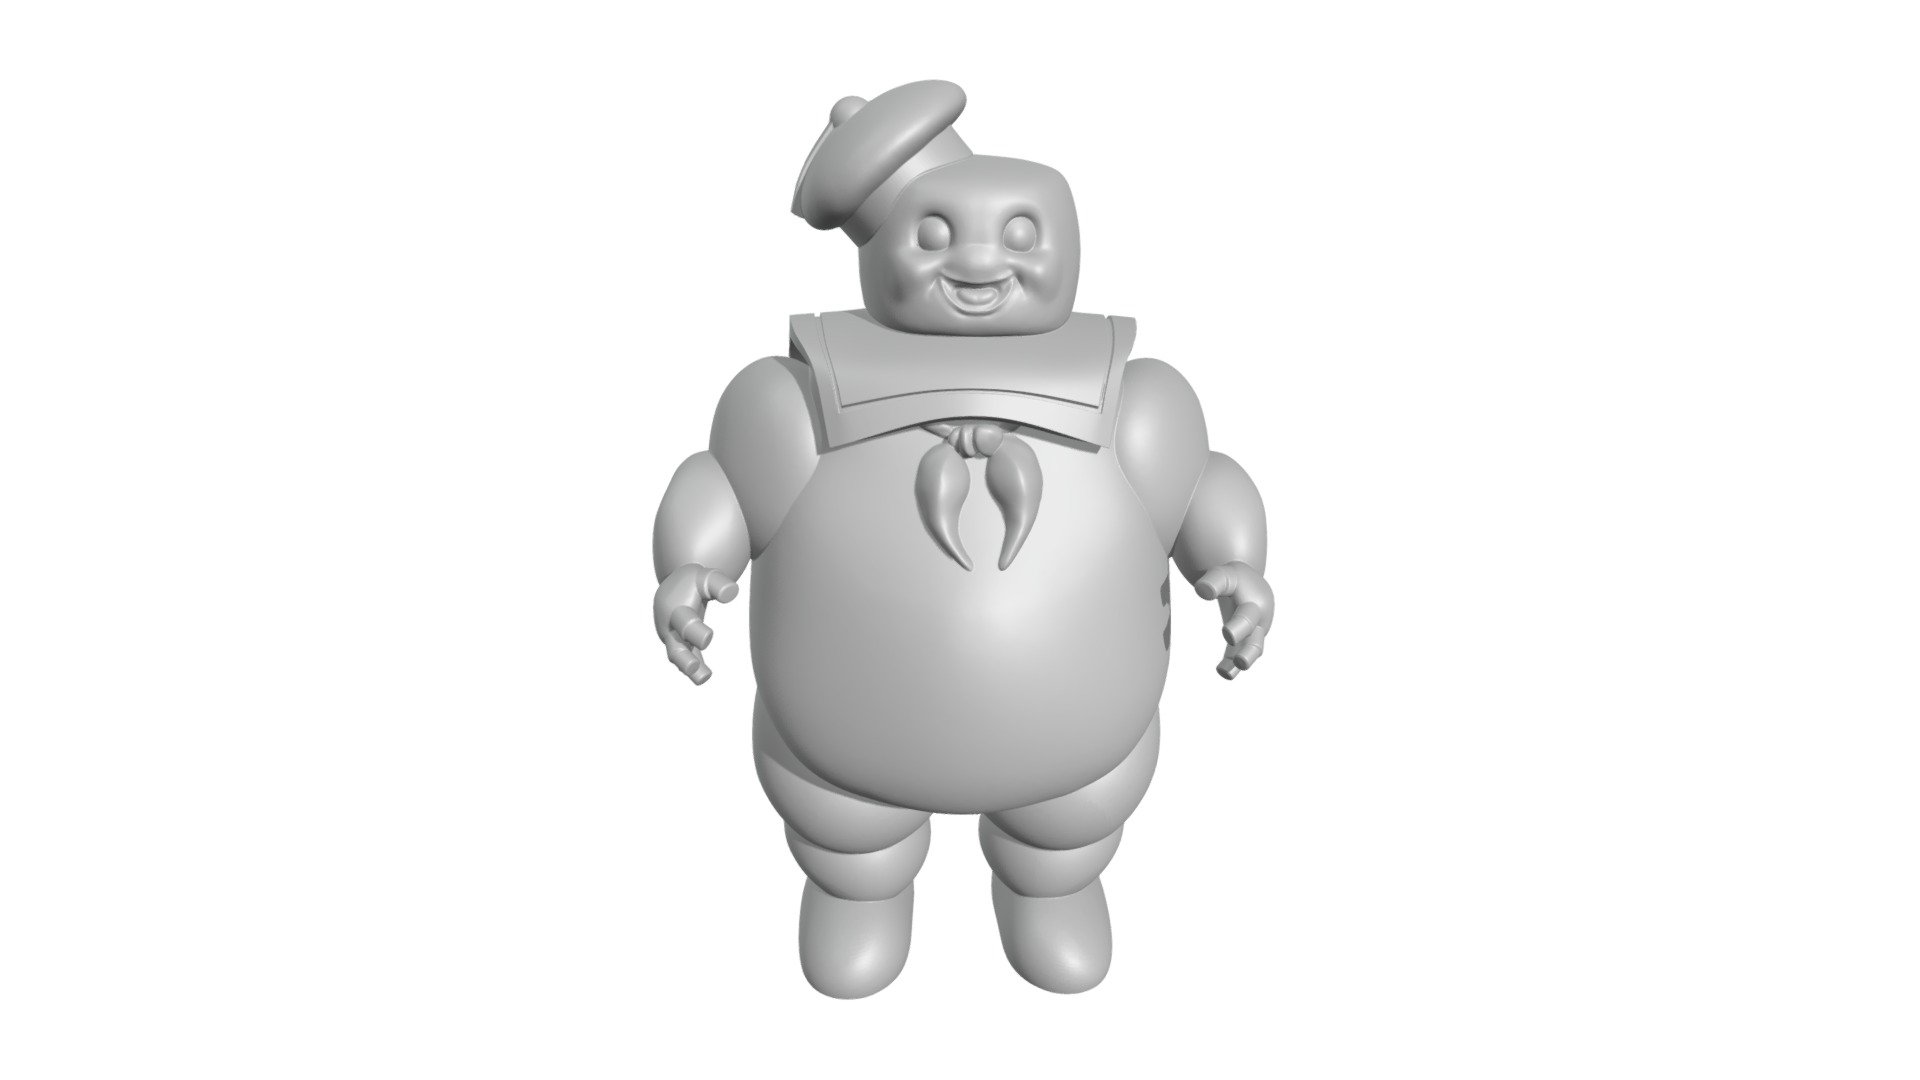 “Marshmallow Man Stay Puft” (full modell)

STL Model for 3D Printing.

Contact me for any question.

Came to see my other work.

If you get this model, I encourage you to give me feedback, just send me a message on instagram, I’d very happy to help or hear your feedback and pictures :)

For other custom products, please contact me, I would be glad to help you, I accept non or exclusive commissions.

If you like my art, please support me by purchasing my models, or following me on social media:

Instagram: @animaartistspieces

TikTok: @animaartistspieces

Facebook: @Anima Artist’s pieces

WEBSITE: https://www.animacampania.it/site/

Linktree: https://linktr.ee/animaartistspieces - Marshmallow Man Stay Puft (Full model) - Buy Royalty Free 3D model by Anima artist's pieces (@animaartistspieces) 3d model